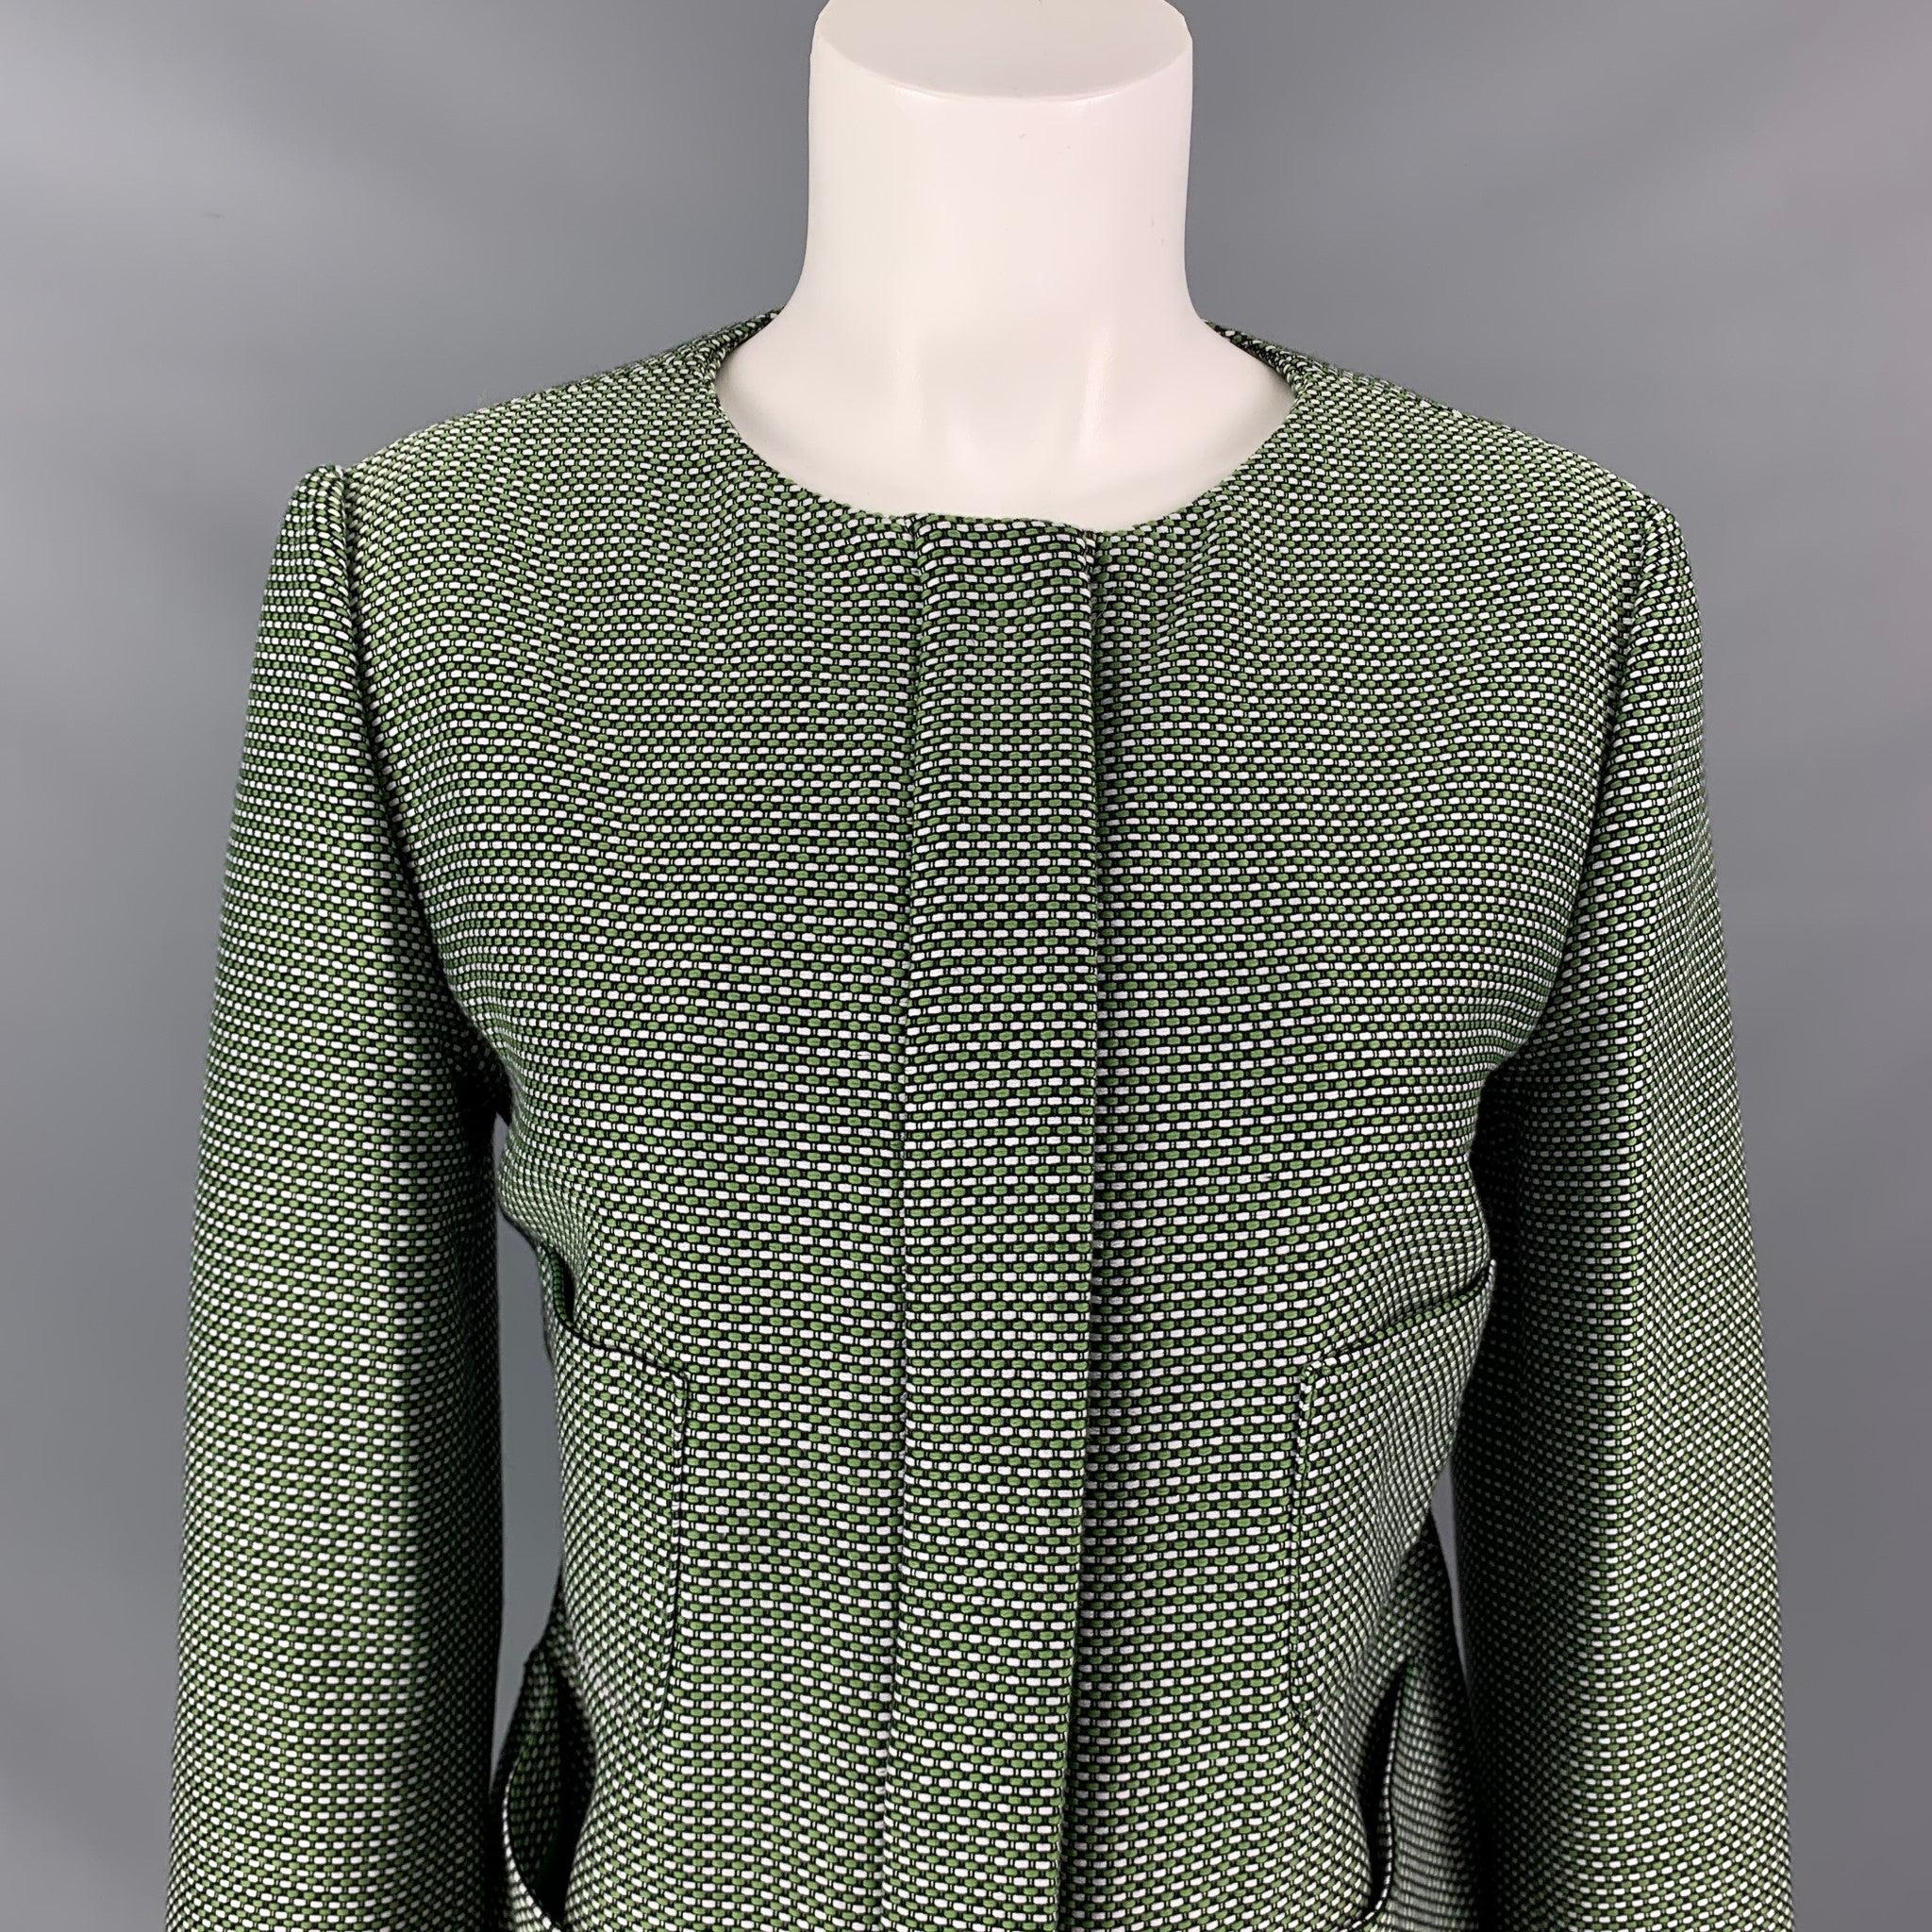 ARMANI COLLEZIONI jacket comes in a green & white woven cotton / polyester featuring a collarless style, patch pockets, and a hidden zip up closure. New With Tags.  
 

 Marked:  12 
 

 Measurements: 
  
 Shoulder: 16 inches Bust: 42 inches Sleeve: